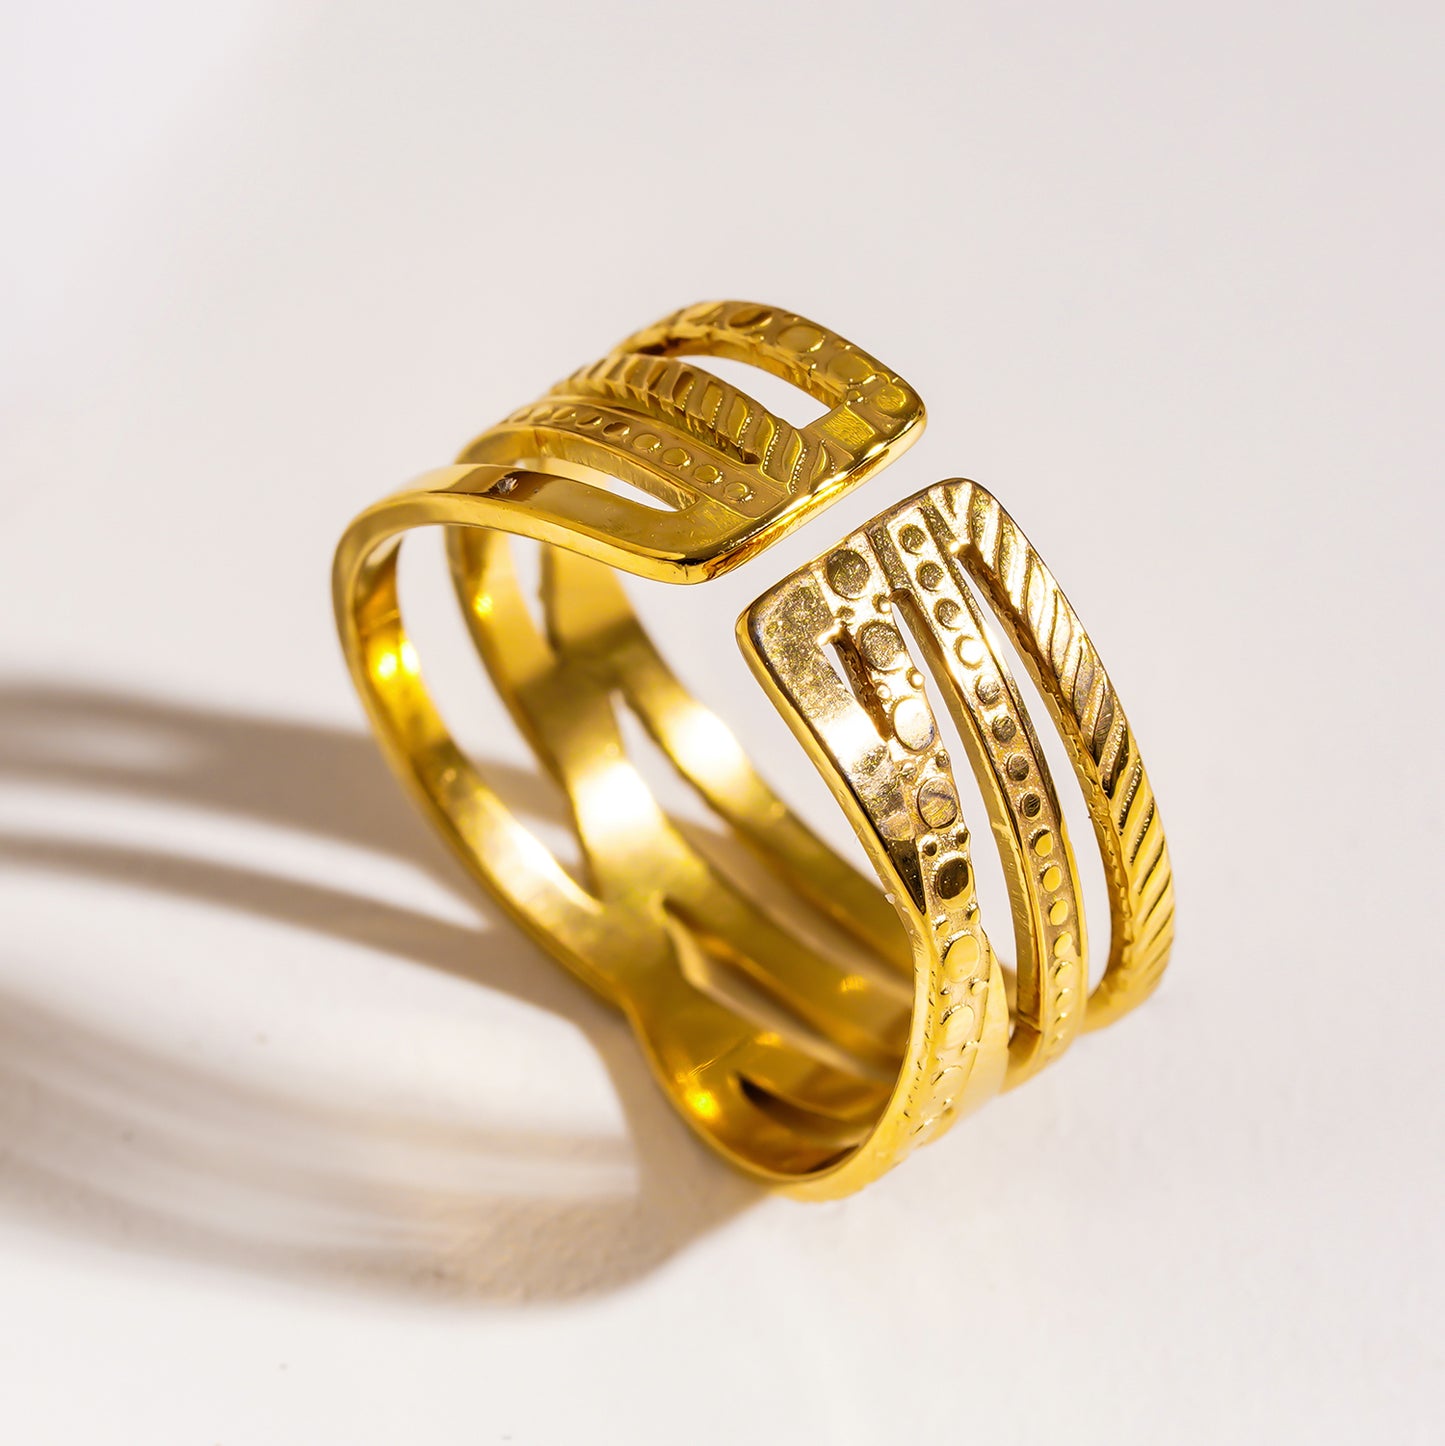 Style ALOIS 7793: Cross Over Multi Stacked Textured Gold Ring.